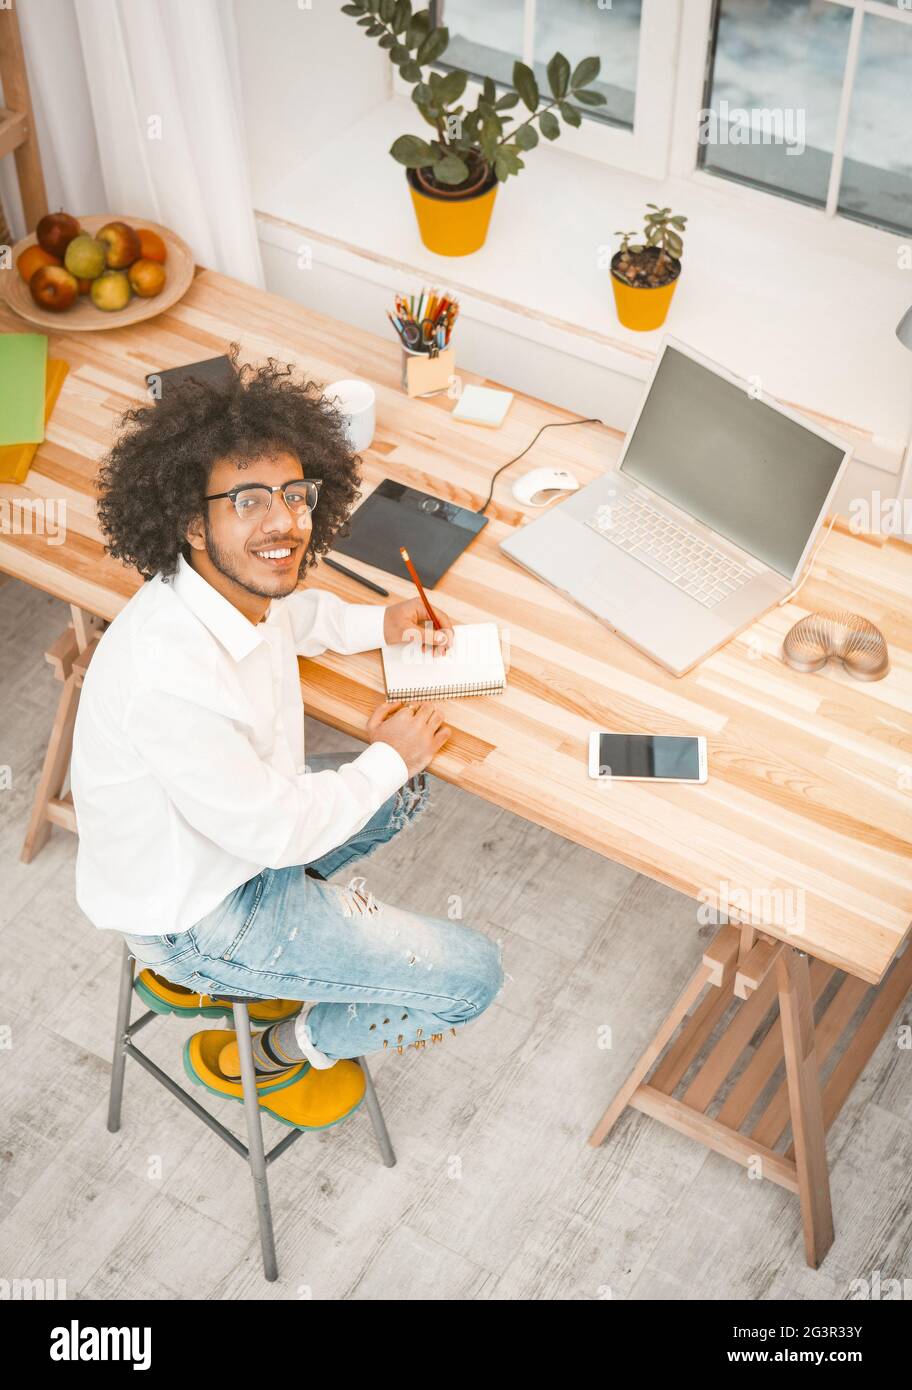 Creative millennial man working at home workplace. Young Arab businessman looks at camera sitting at wooden desk with computer, Stock Photo